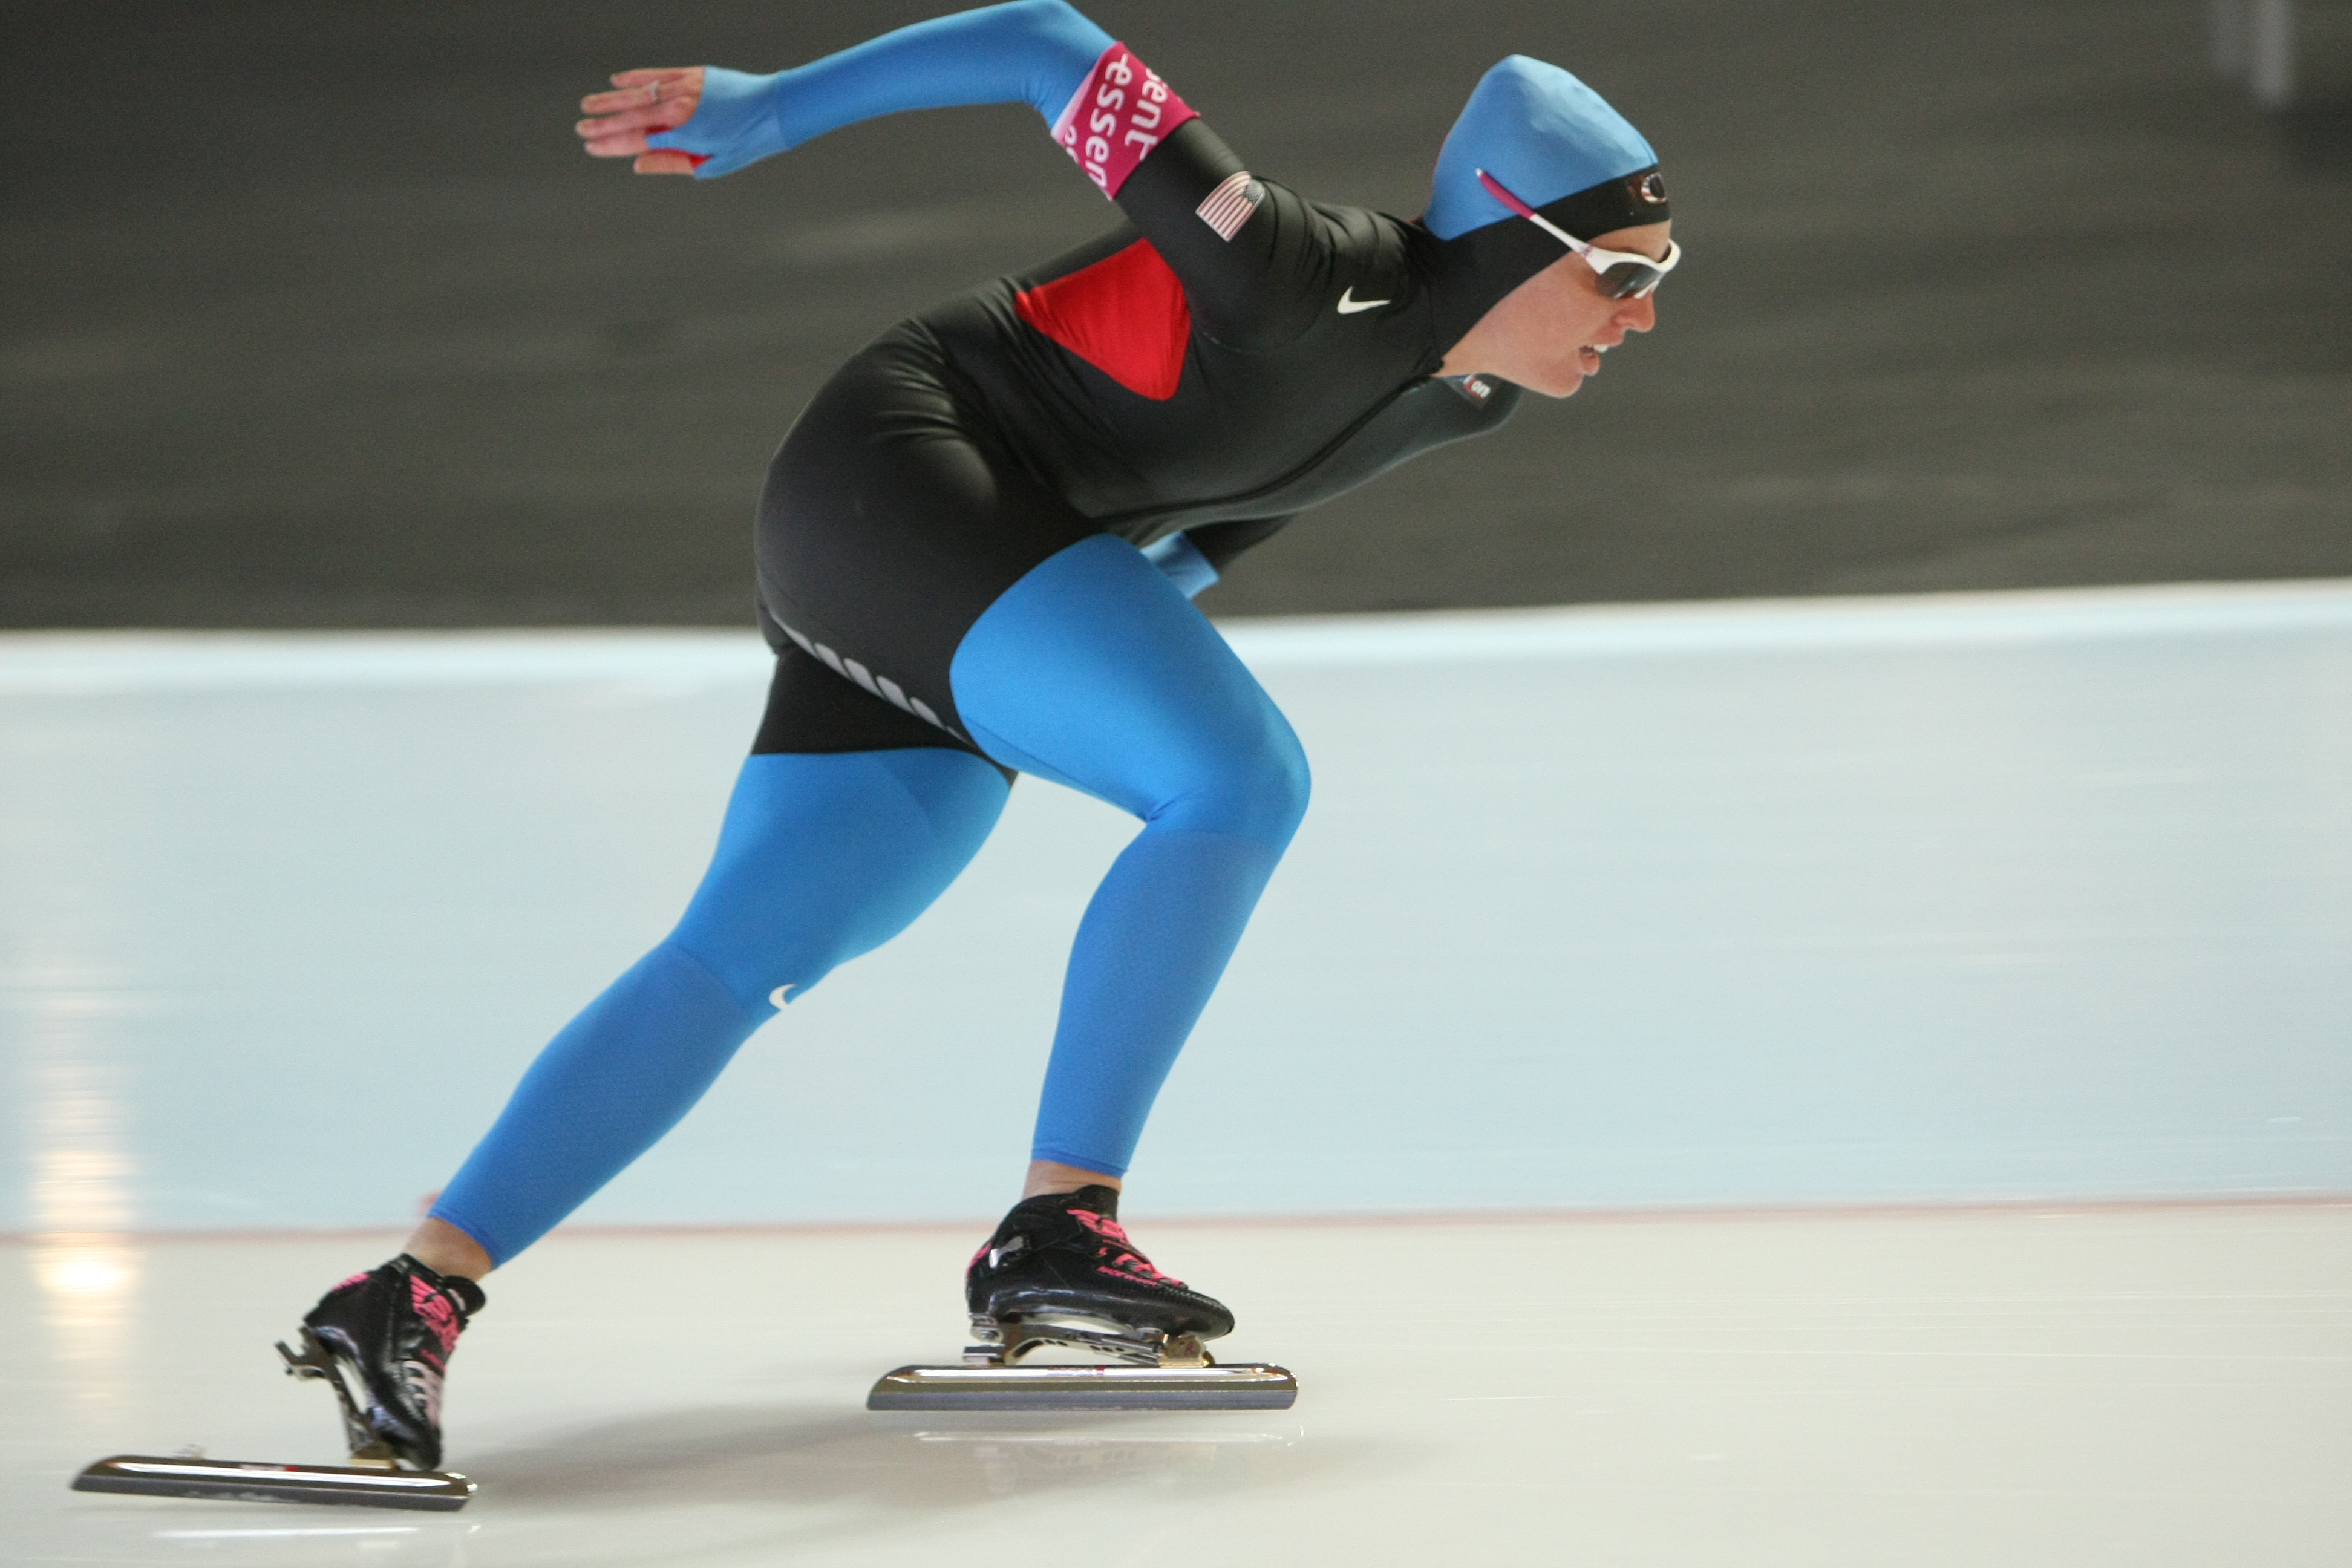 Kelly Gunther will be competing in the Women’s 1,000-meter long track event Thursday during NBC’s coverage of the 2014 Winter Olympics in Sochi, Russia.